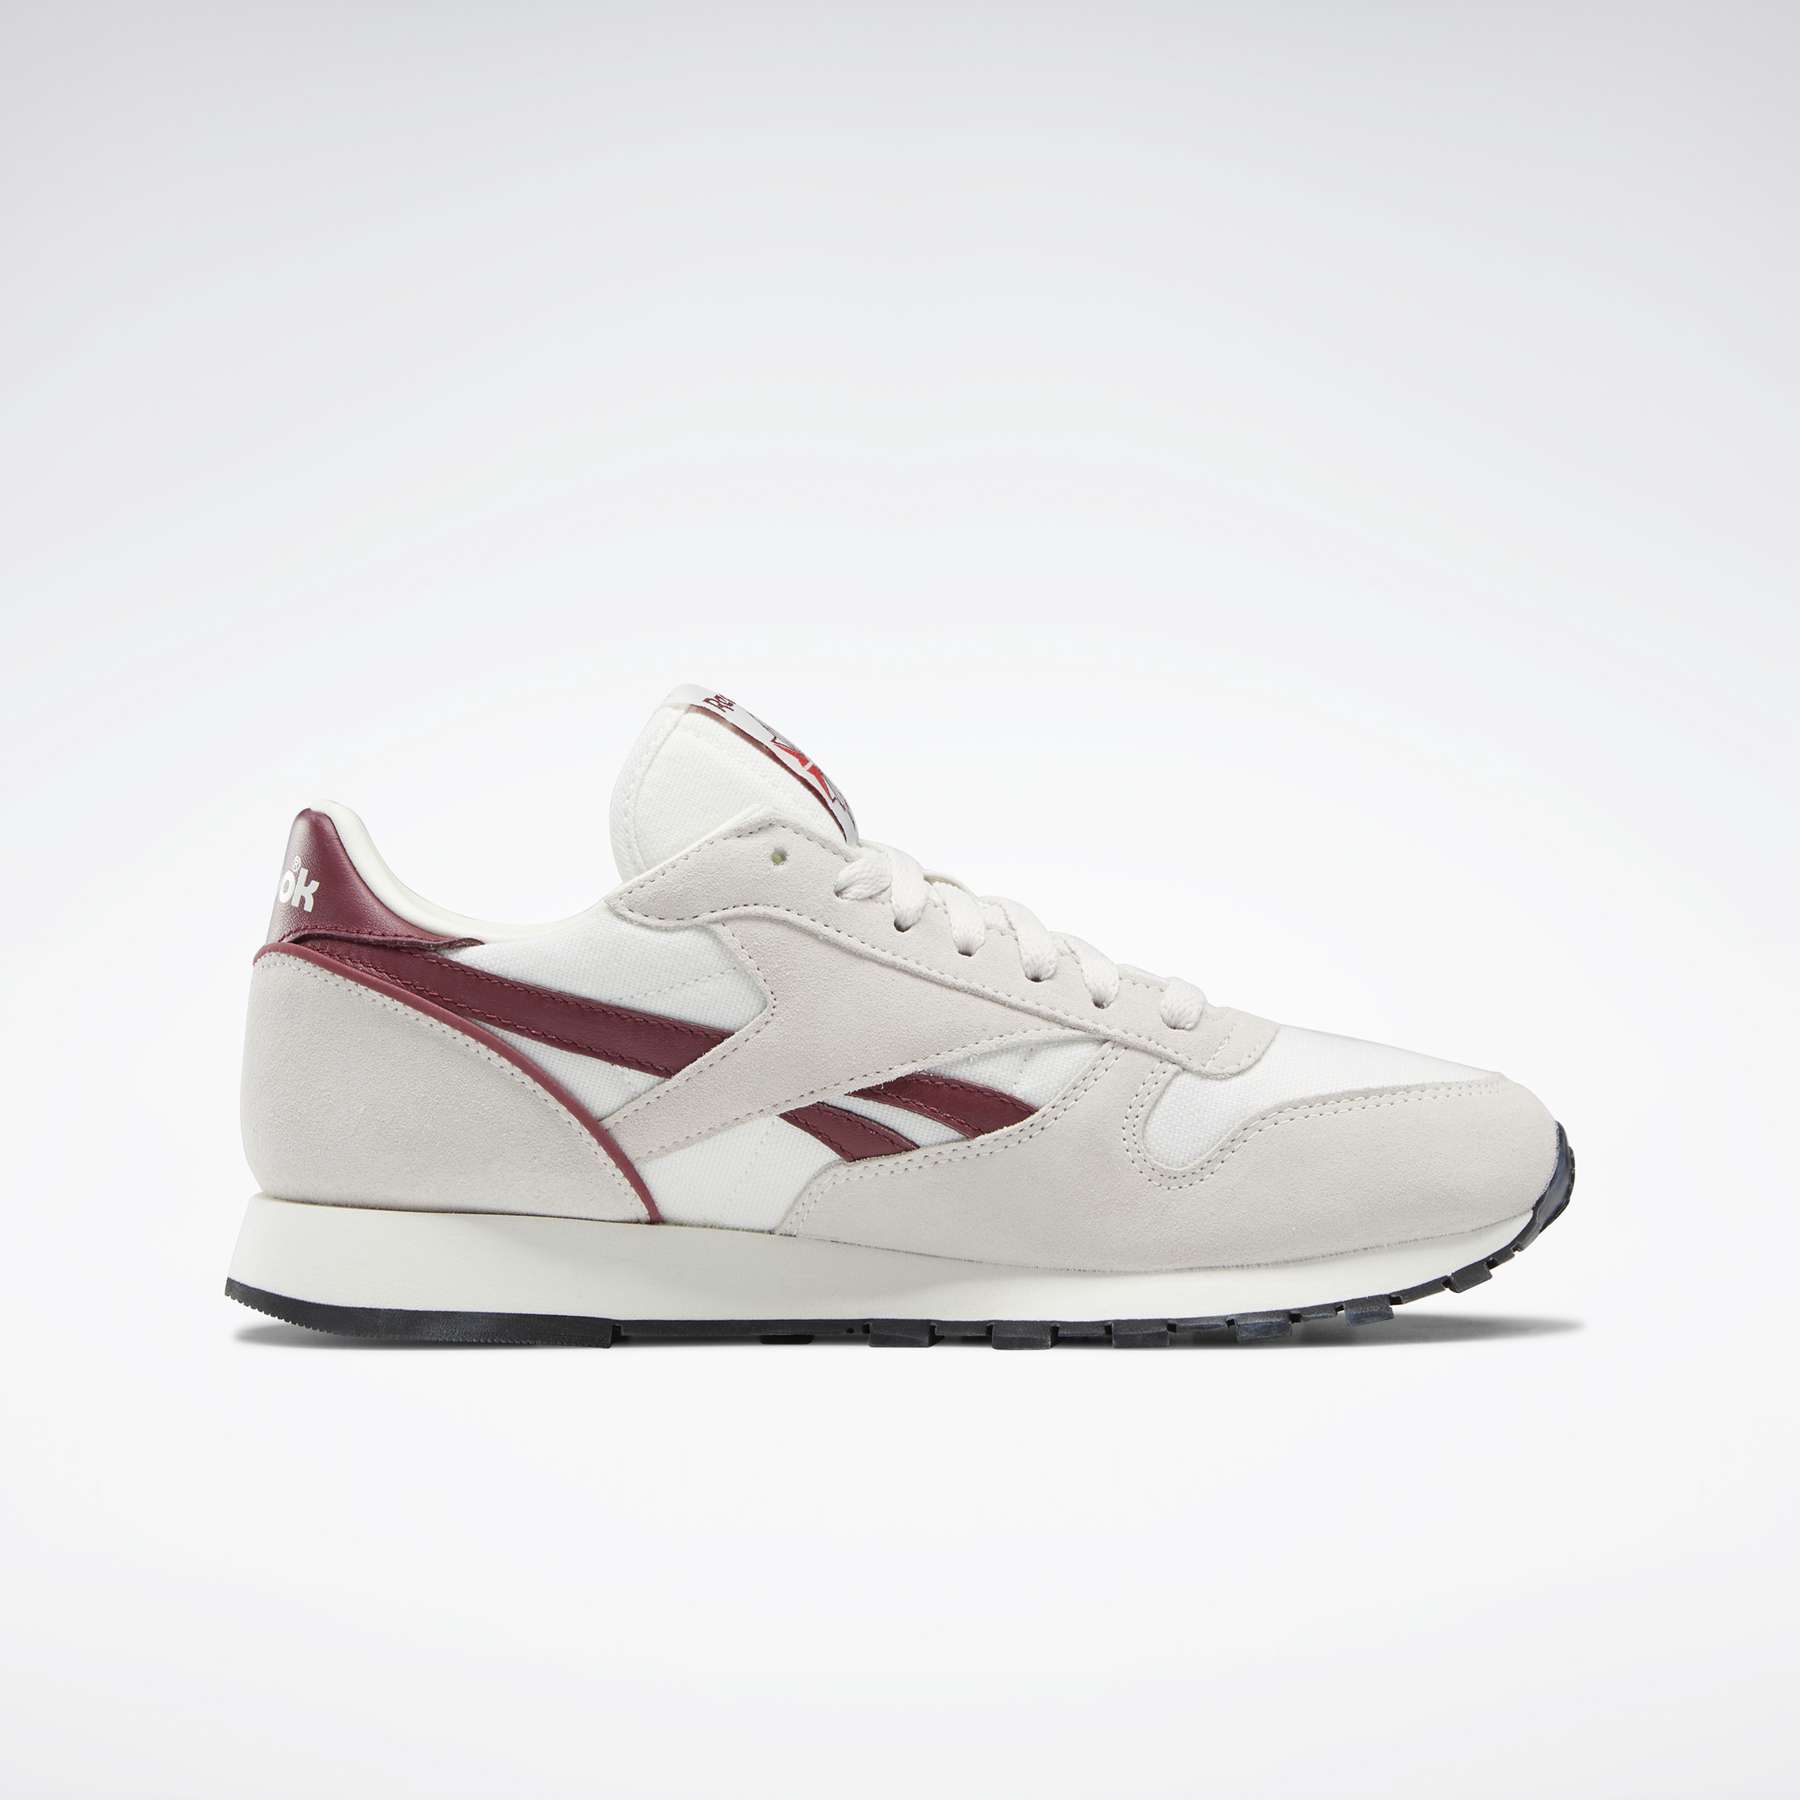 Reebok Classic Leather Gore-Tex Shoes